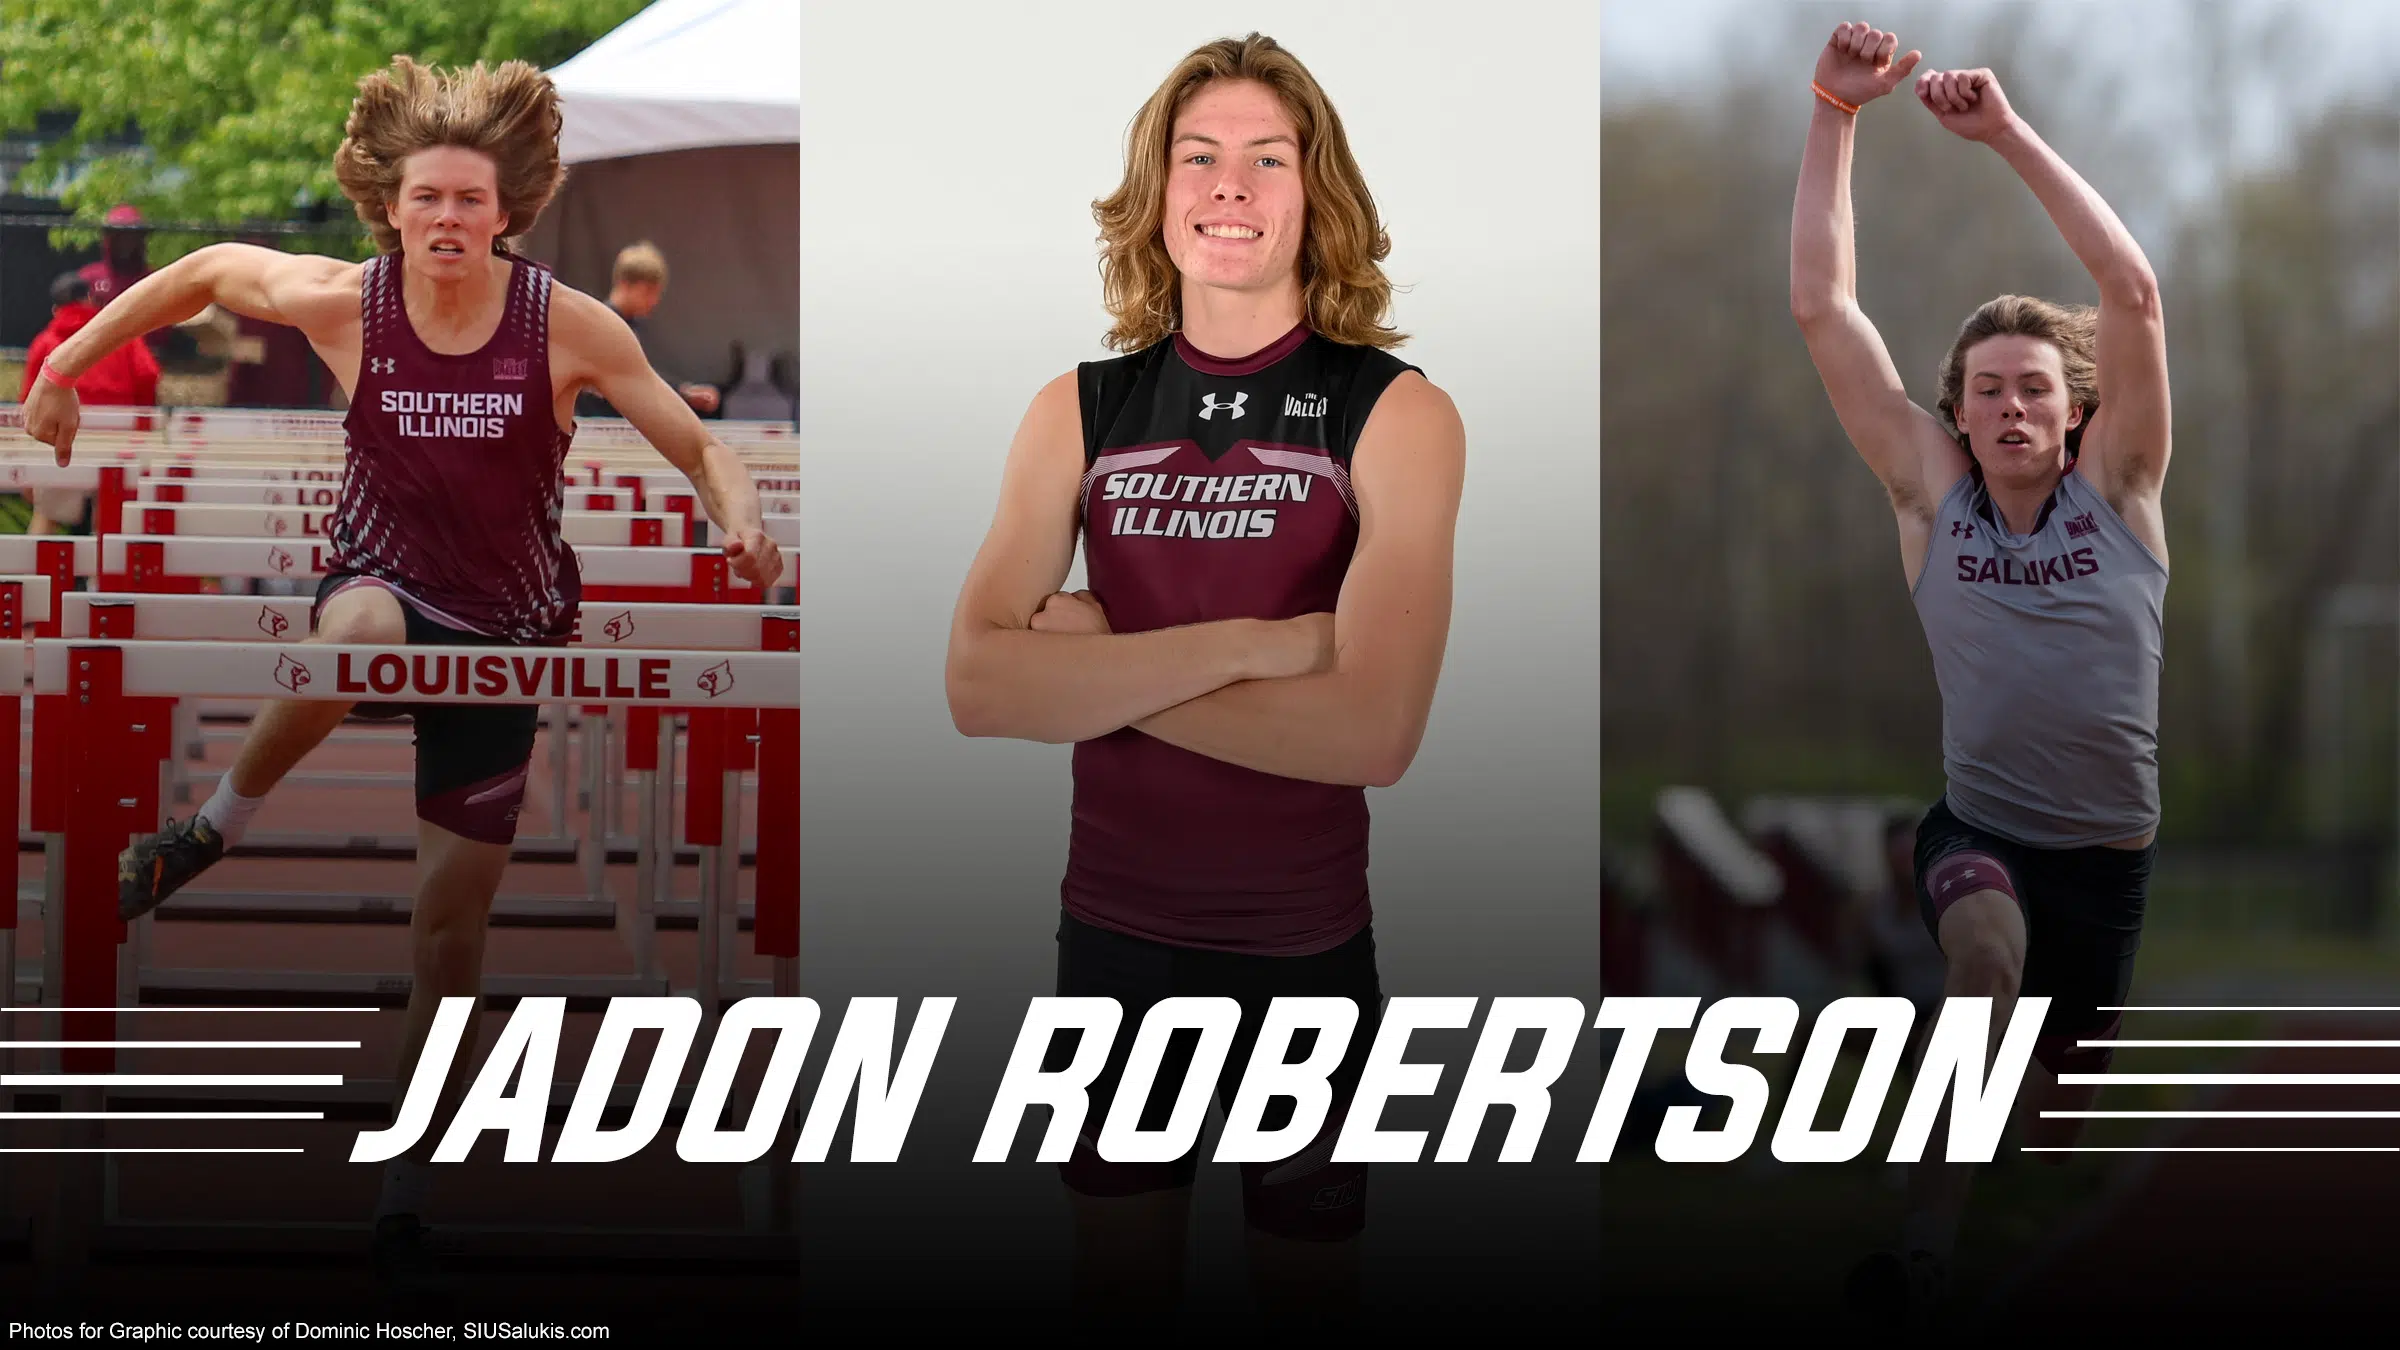 Robertson Takes 4th in Decathlon at USATF U20 Outdoor Championships